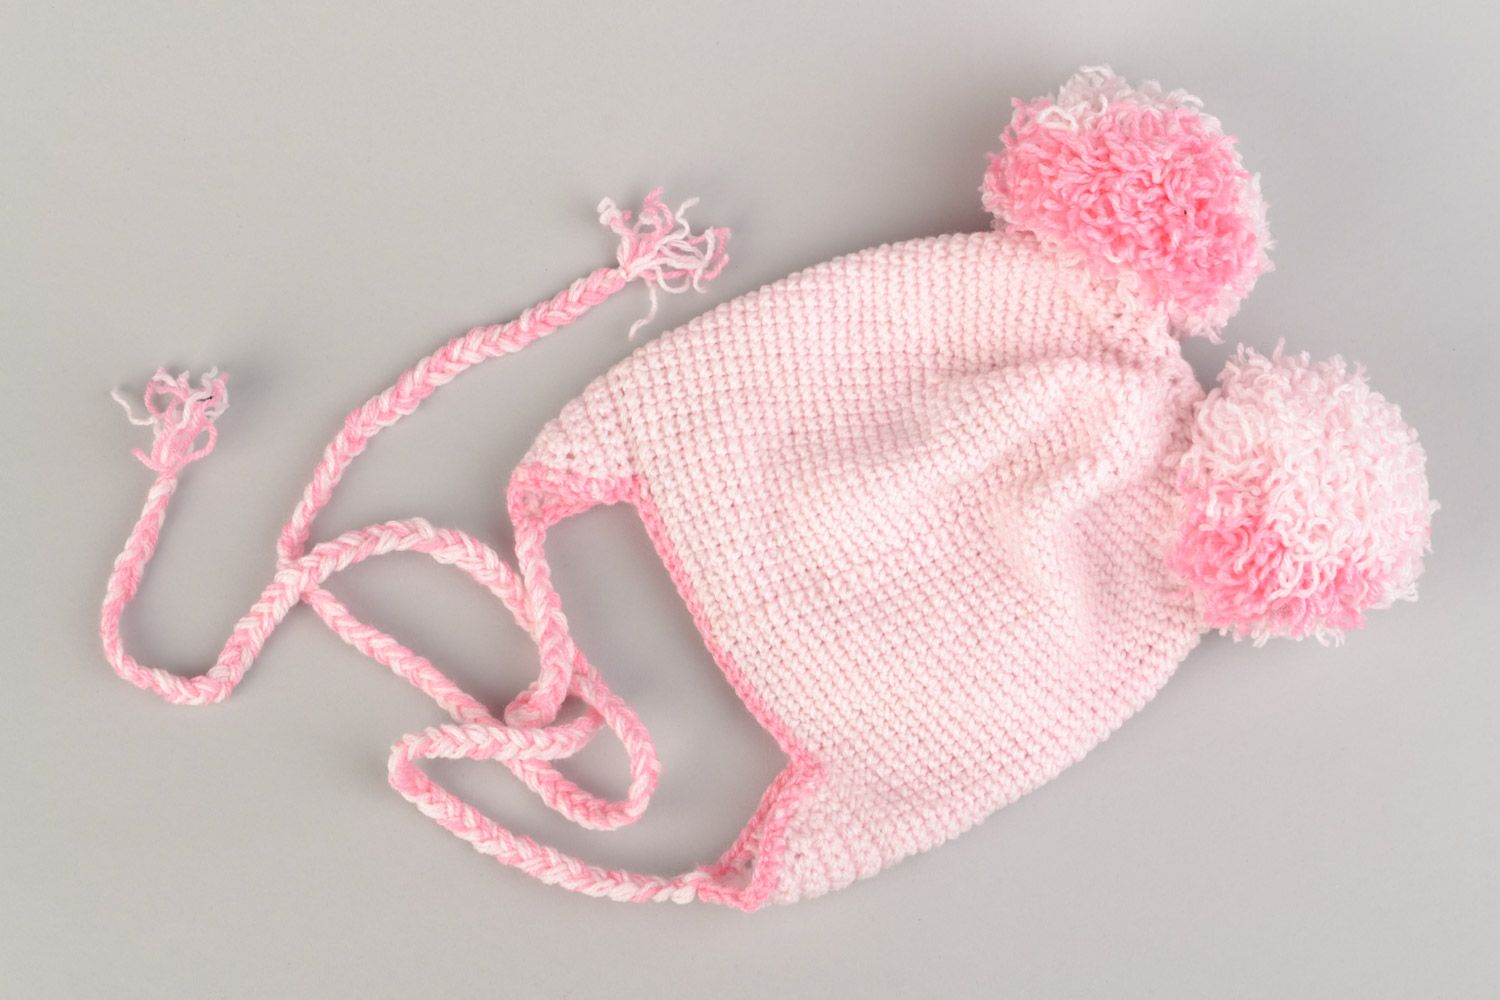 Handmade hat crocheted of hypoallergenic acrylics in the shape of pink bear photo 4